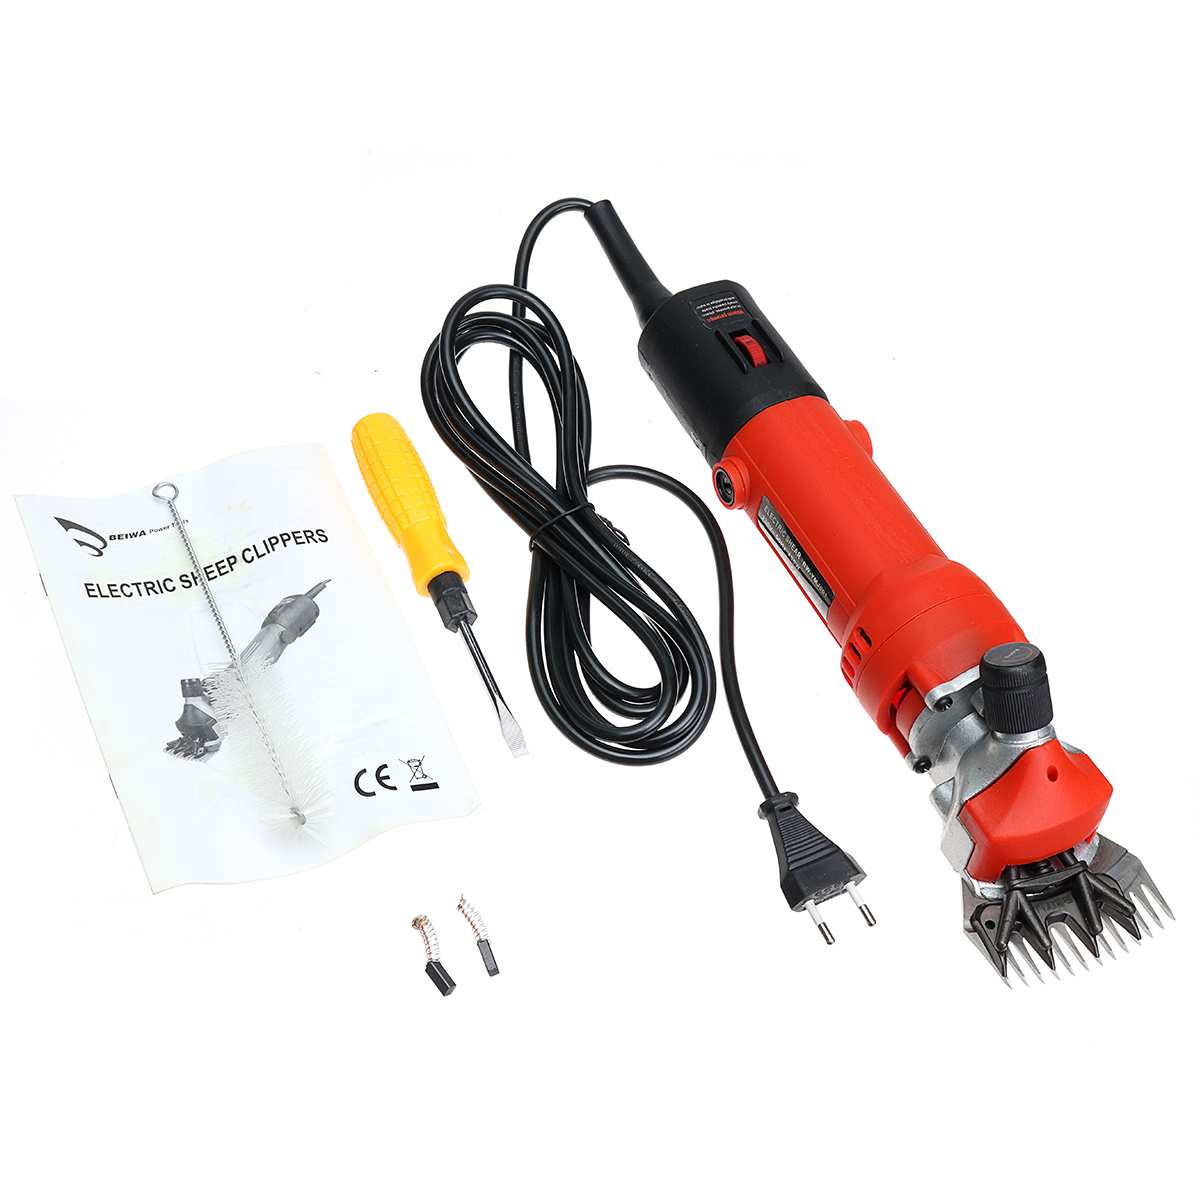 600W-220V-Electric-Sheep-Shearing-Machine-Goat-Hair-Trimmer-Clippers-Power-Tools-1347454-8